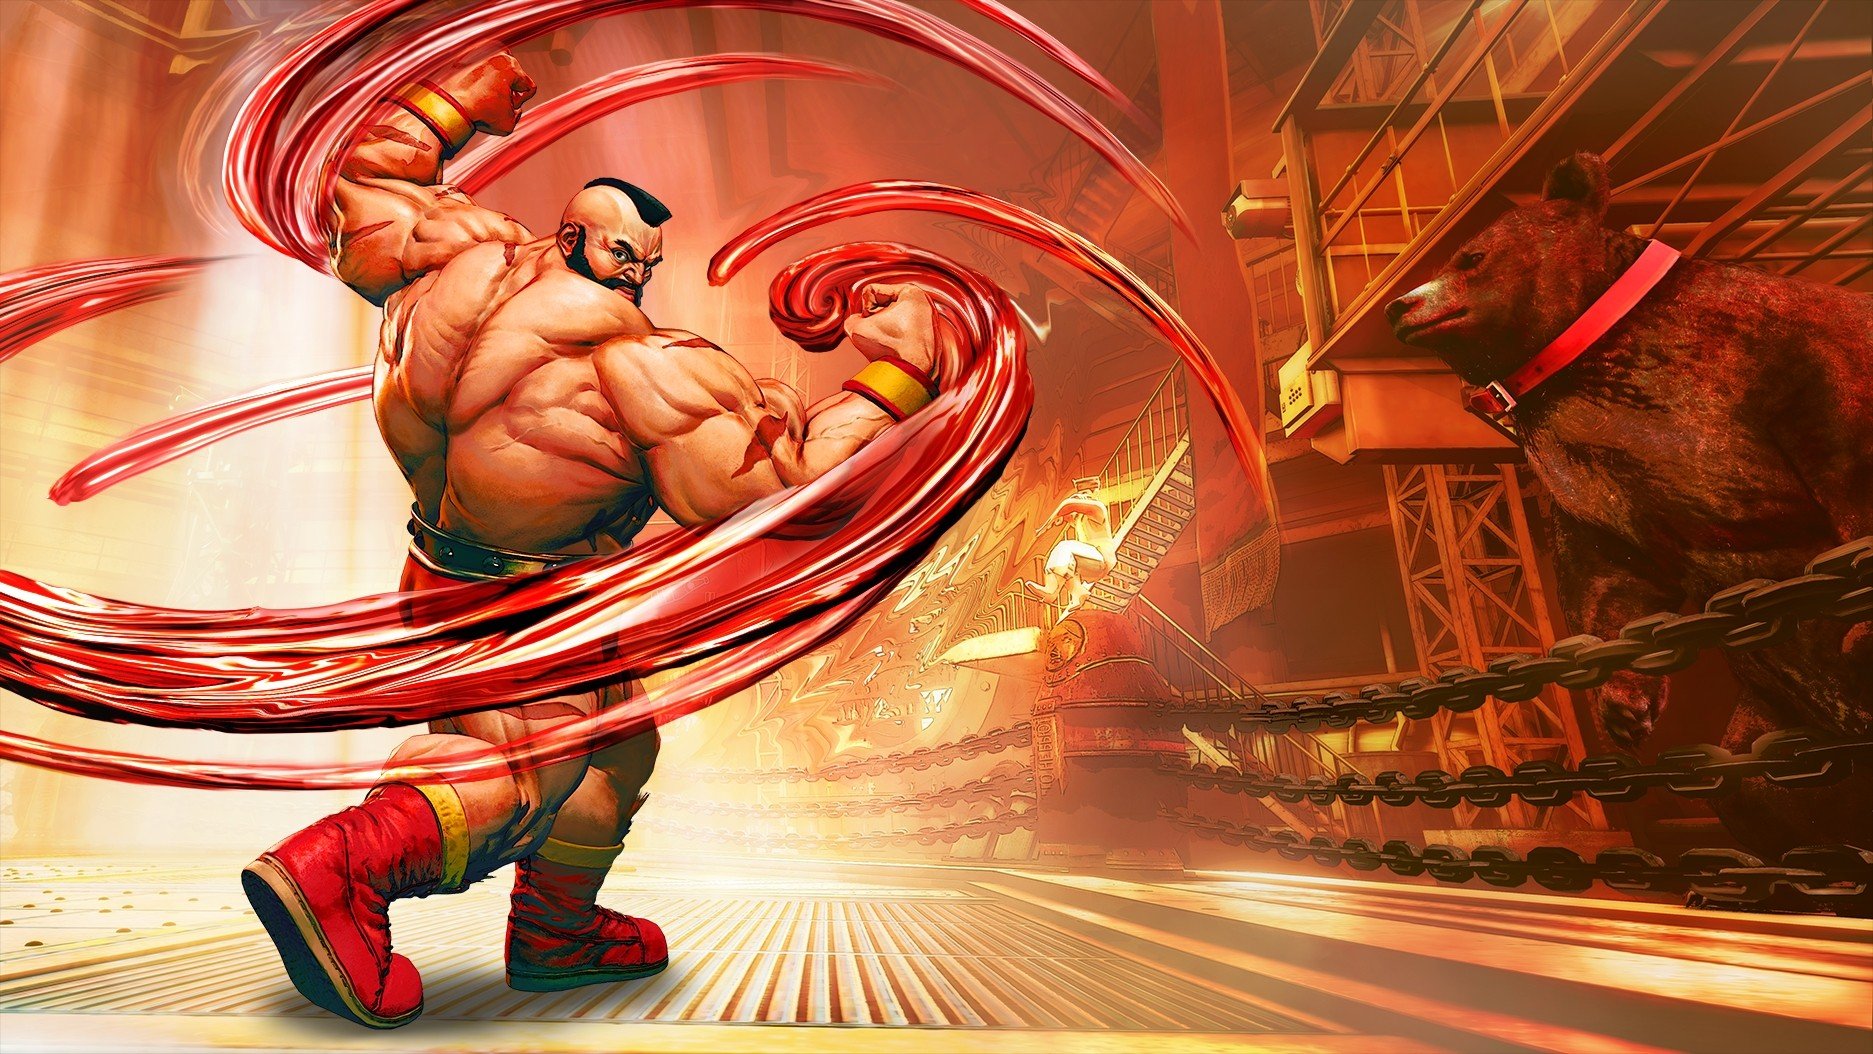 Street Fighter V Zangief Street Fighter Playstation 4 Shirtless Wallpapers Hd Desktop And Mobile Backgrounds